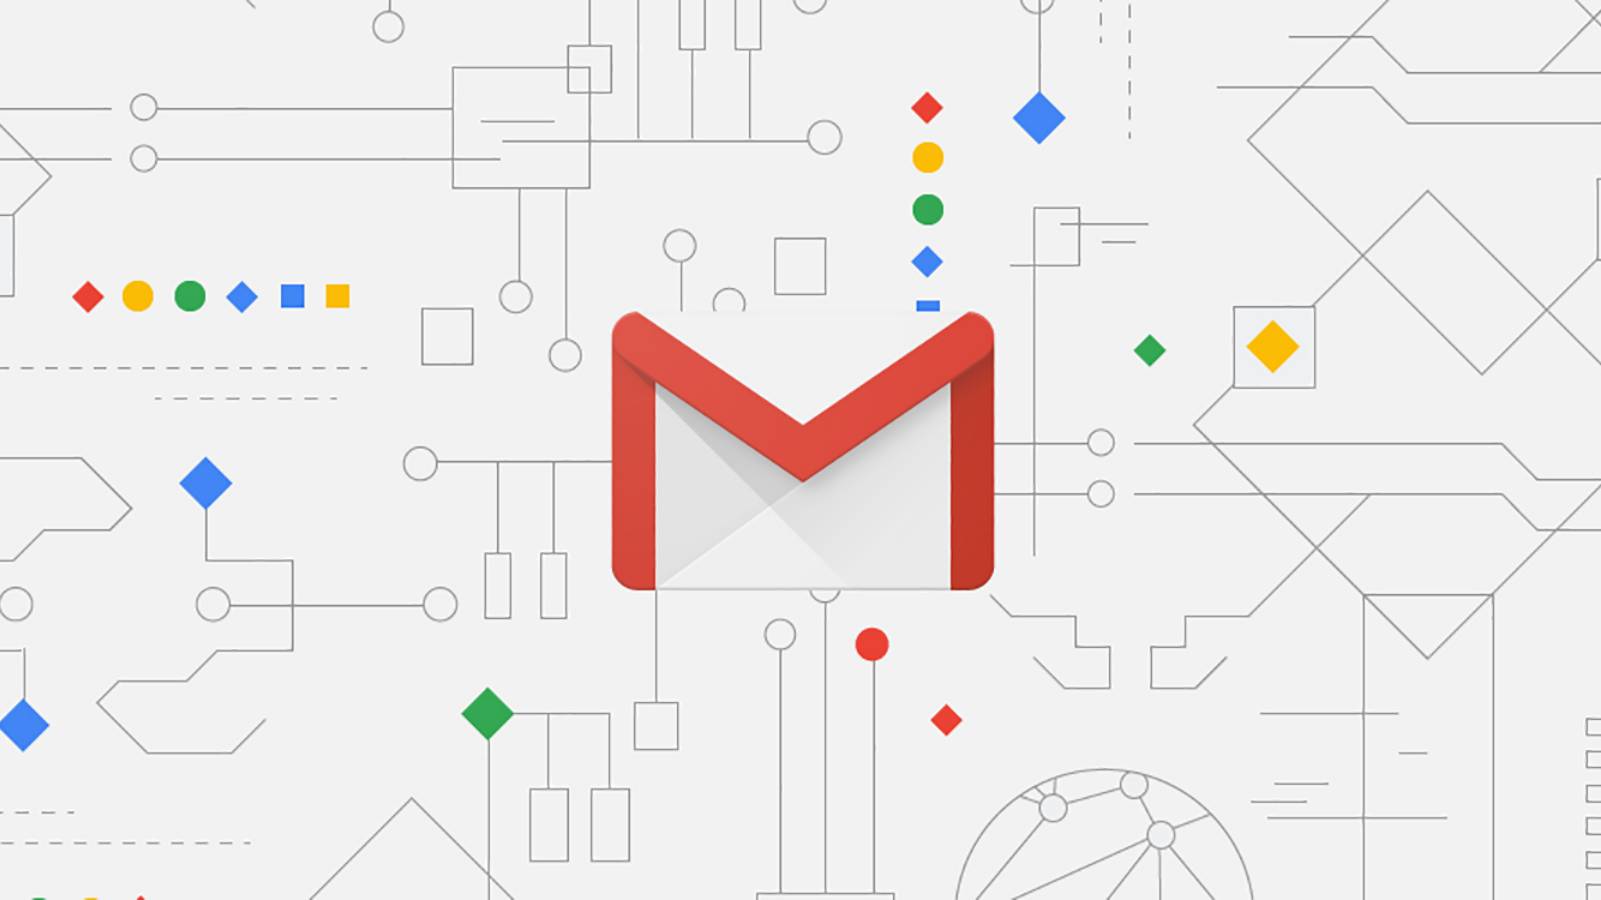 GMAIL chat